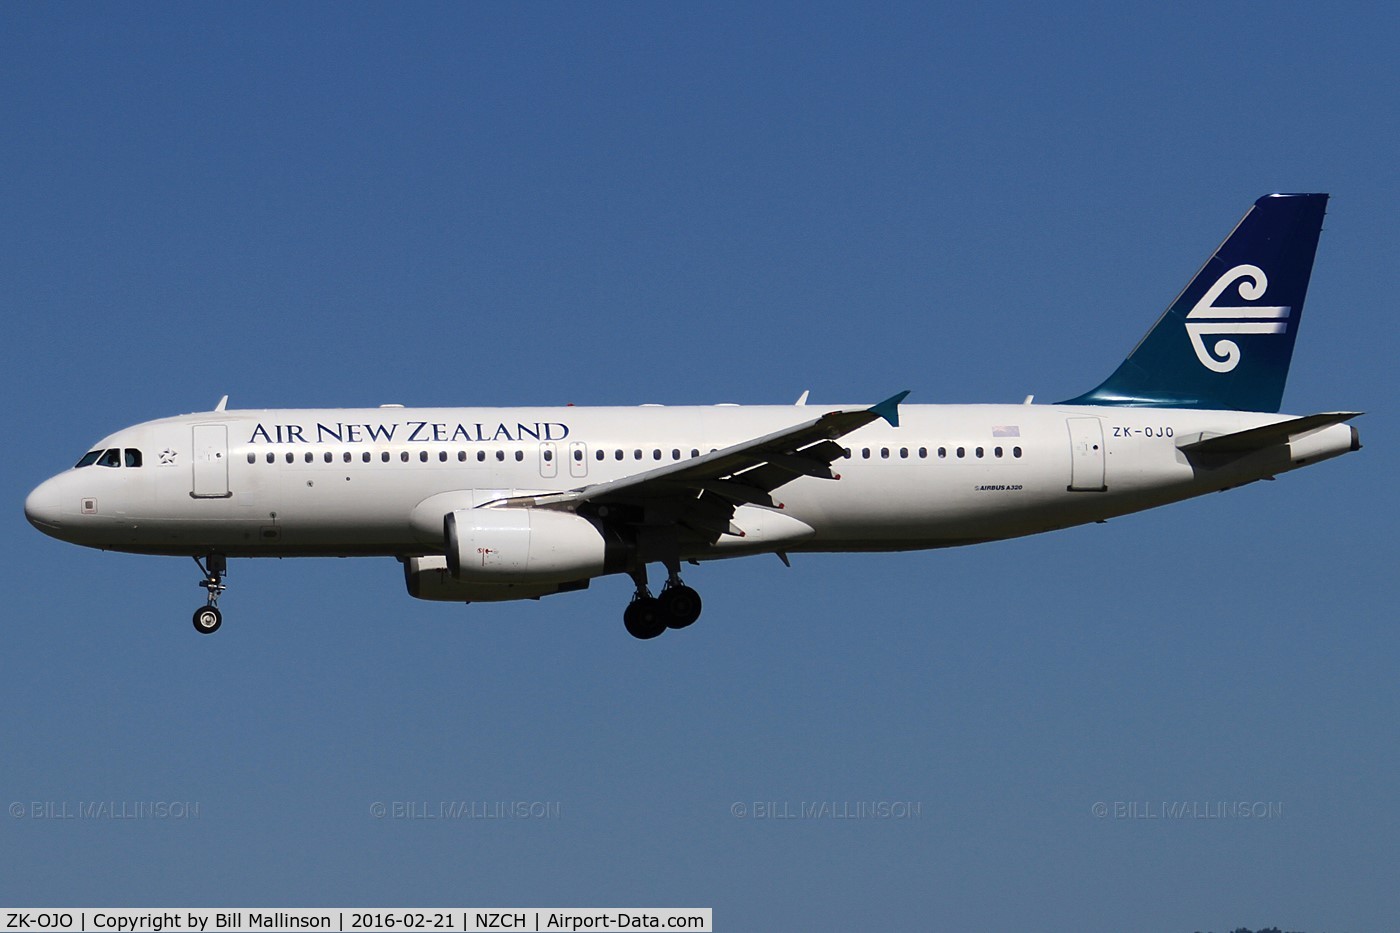 ZK-OJO, 2006 Airbus A320-232 C/N 2663, NZ1211 from WLG